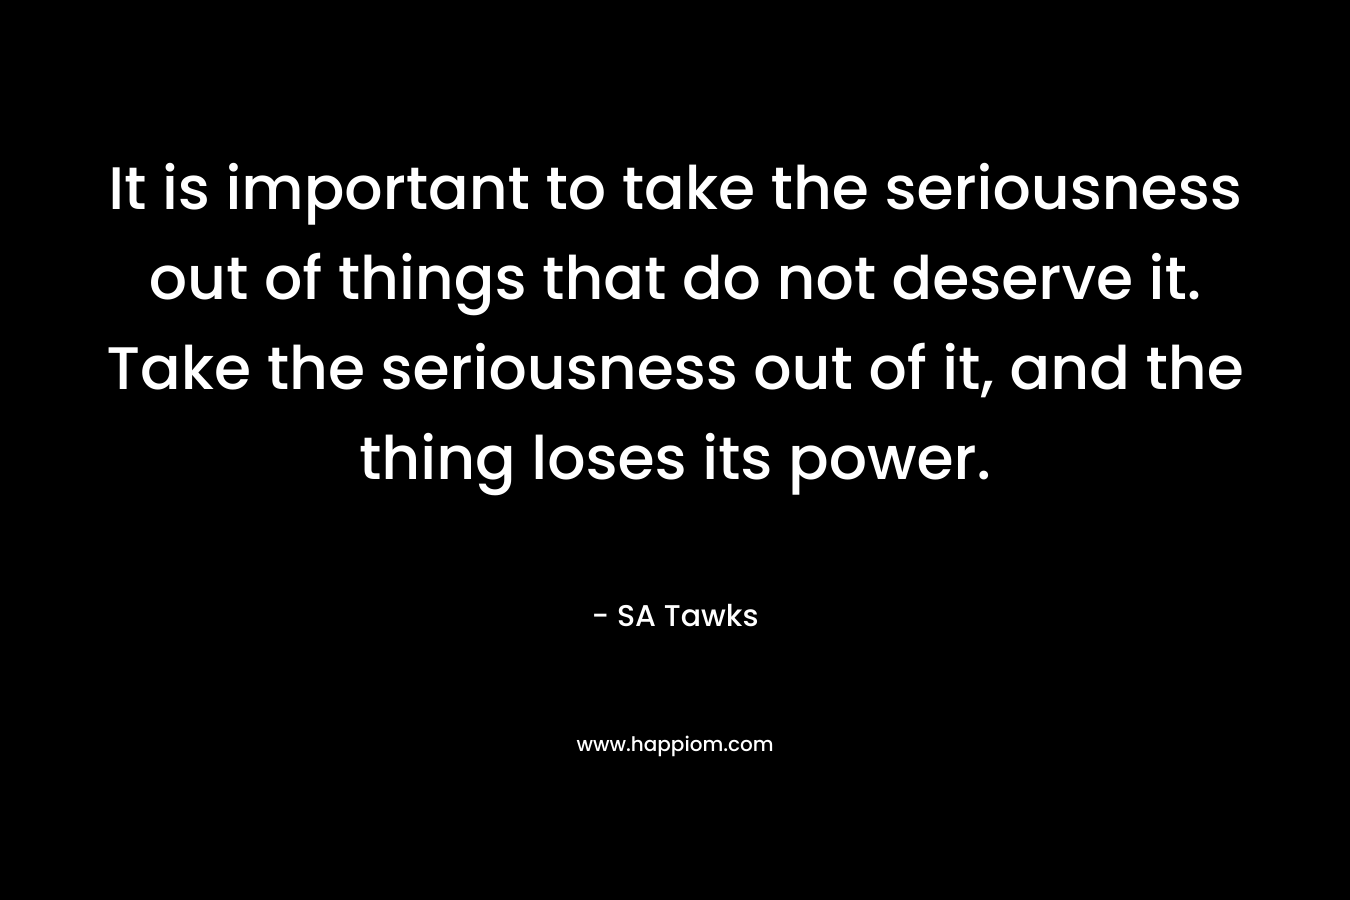 It is important to take the seriousness out of things that do not deserve it. Take the seriousness out of it, and the thing loses its power.